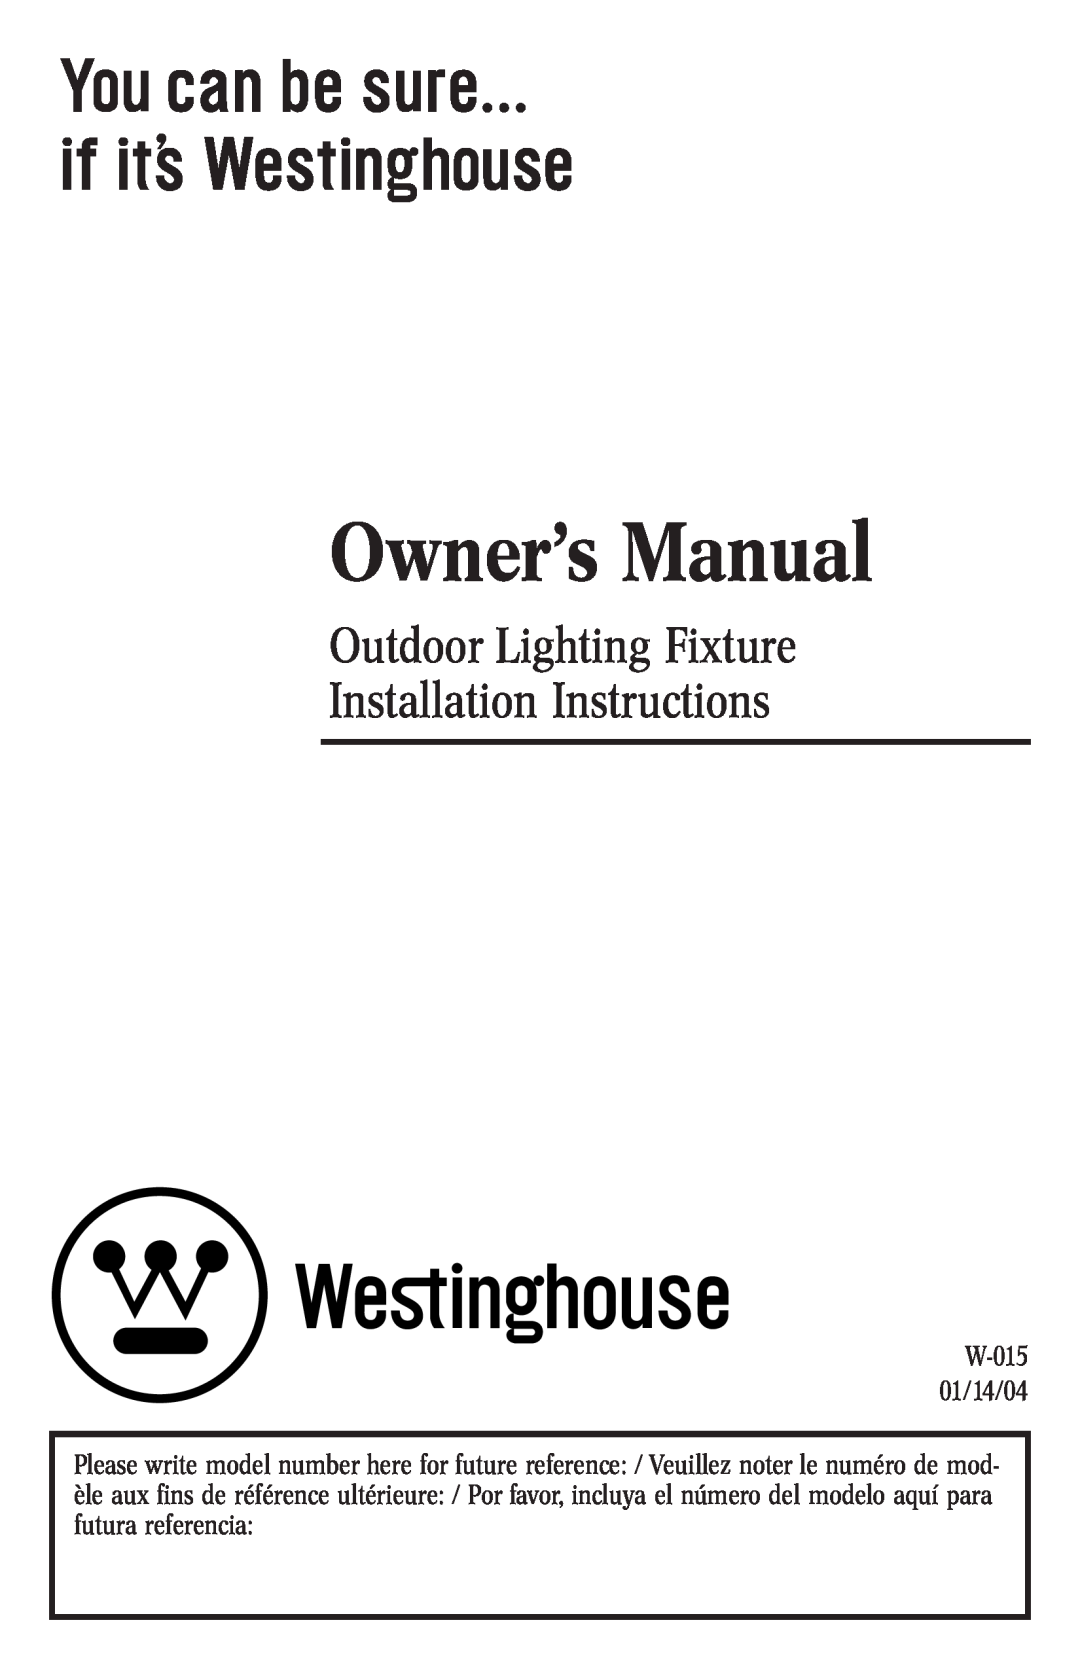 Westinghouse W-015 owner manual Outdoor Lighting Fixture Installation Instructions 